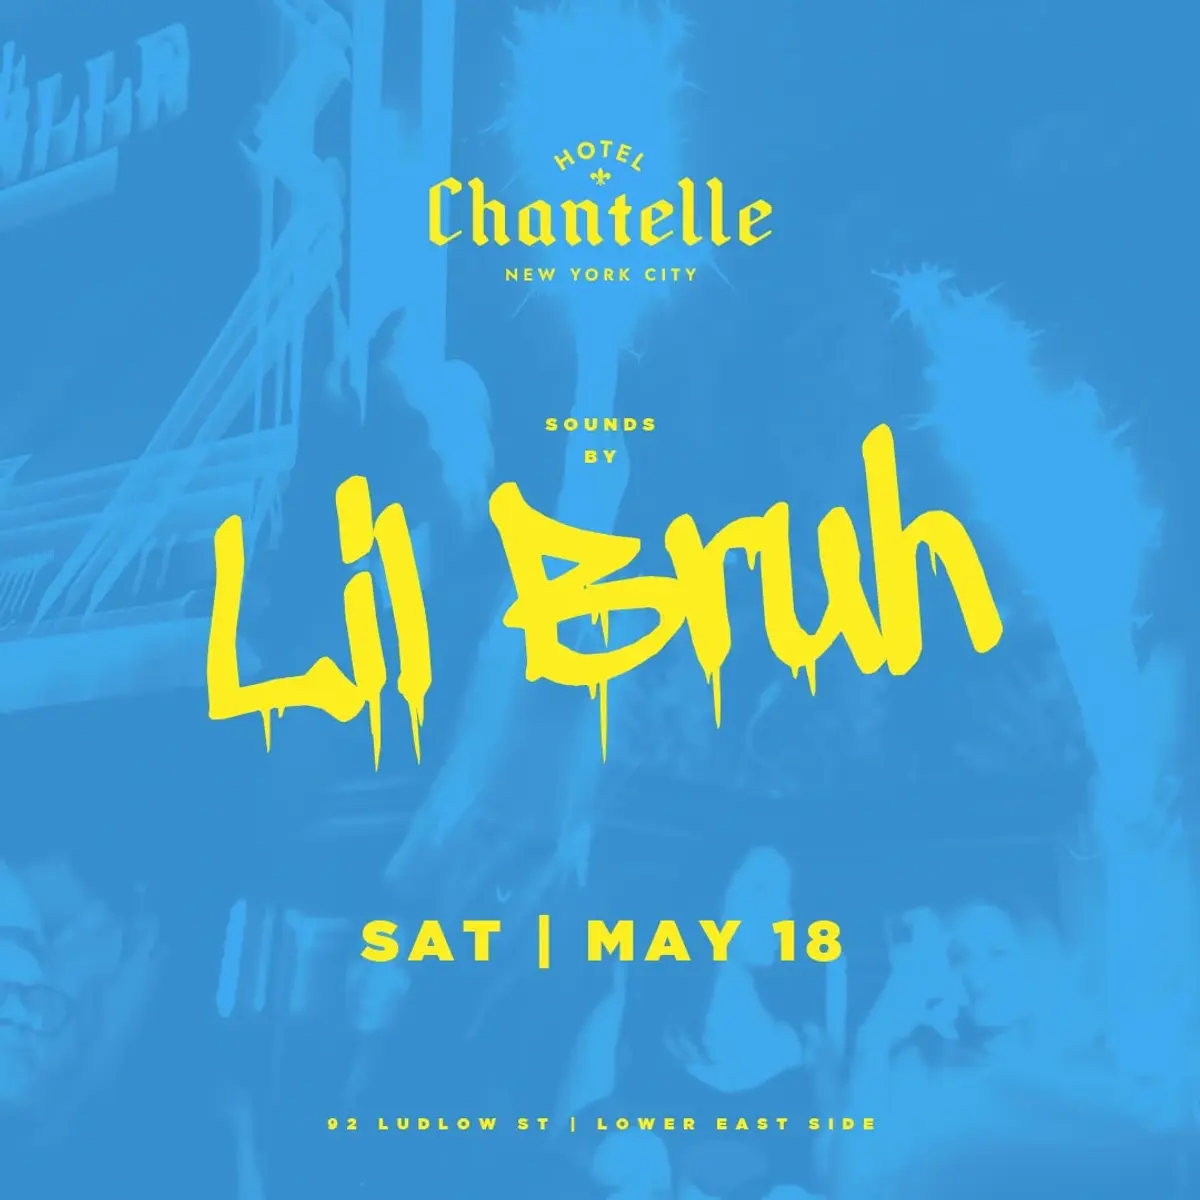 Hotel Chantelle Saturday 5/18 - Rooftop Access